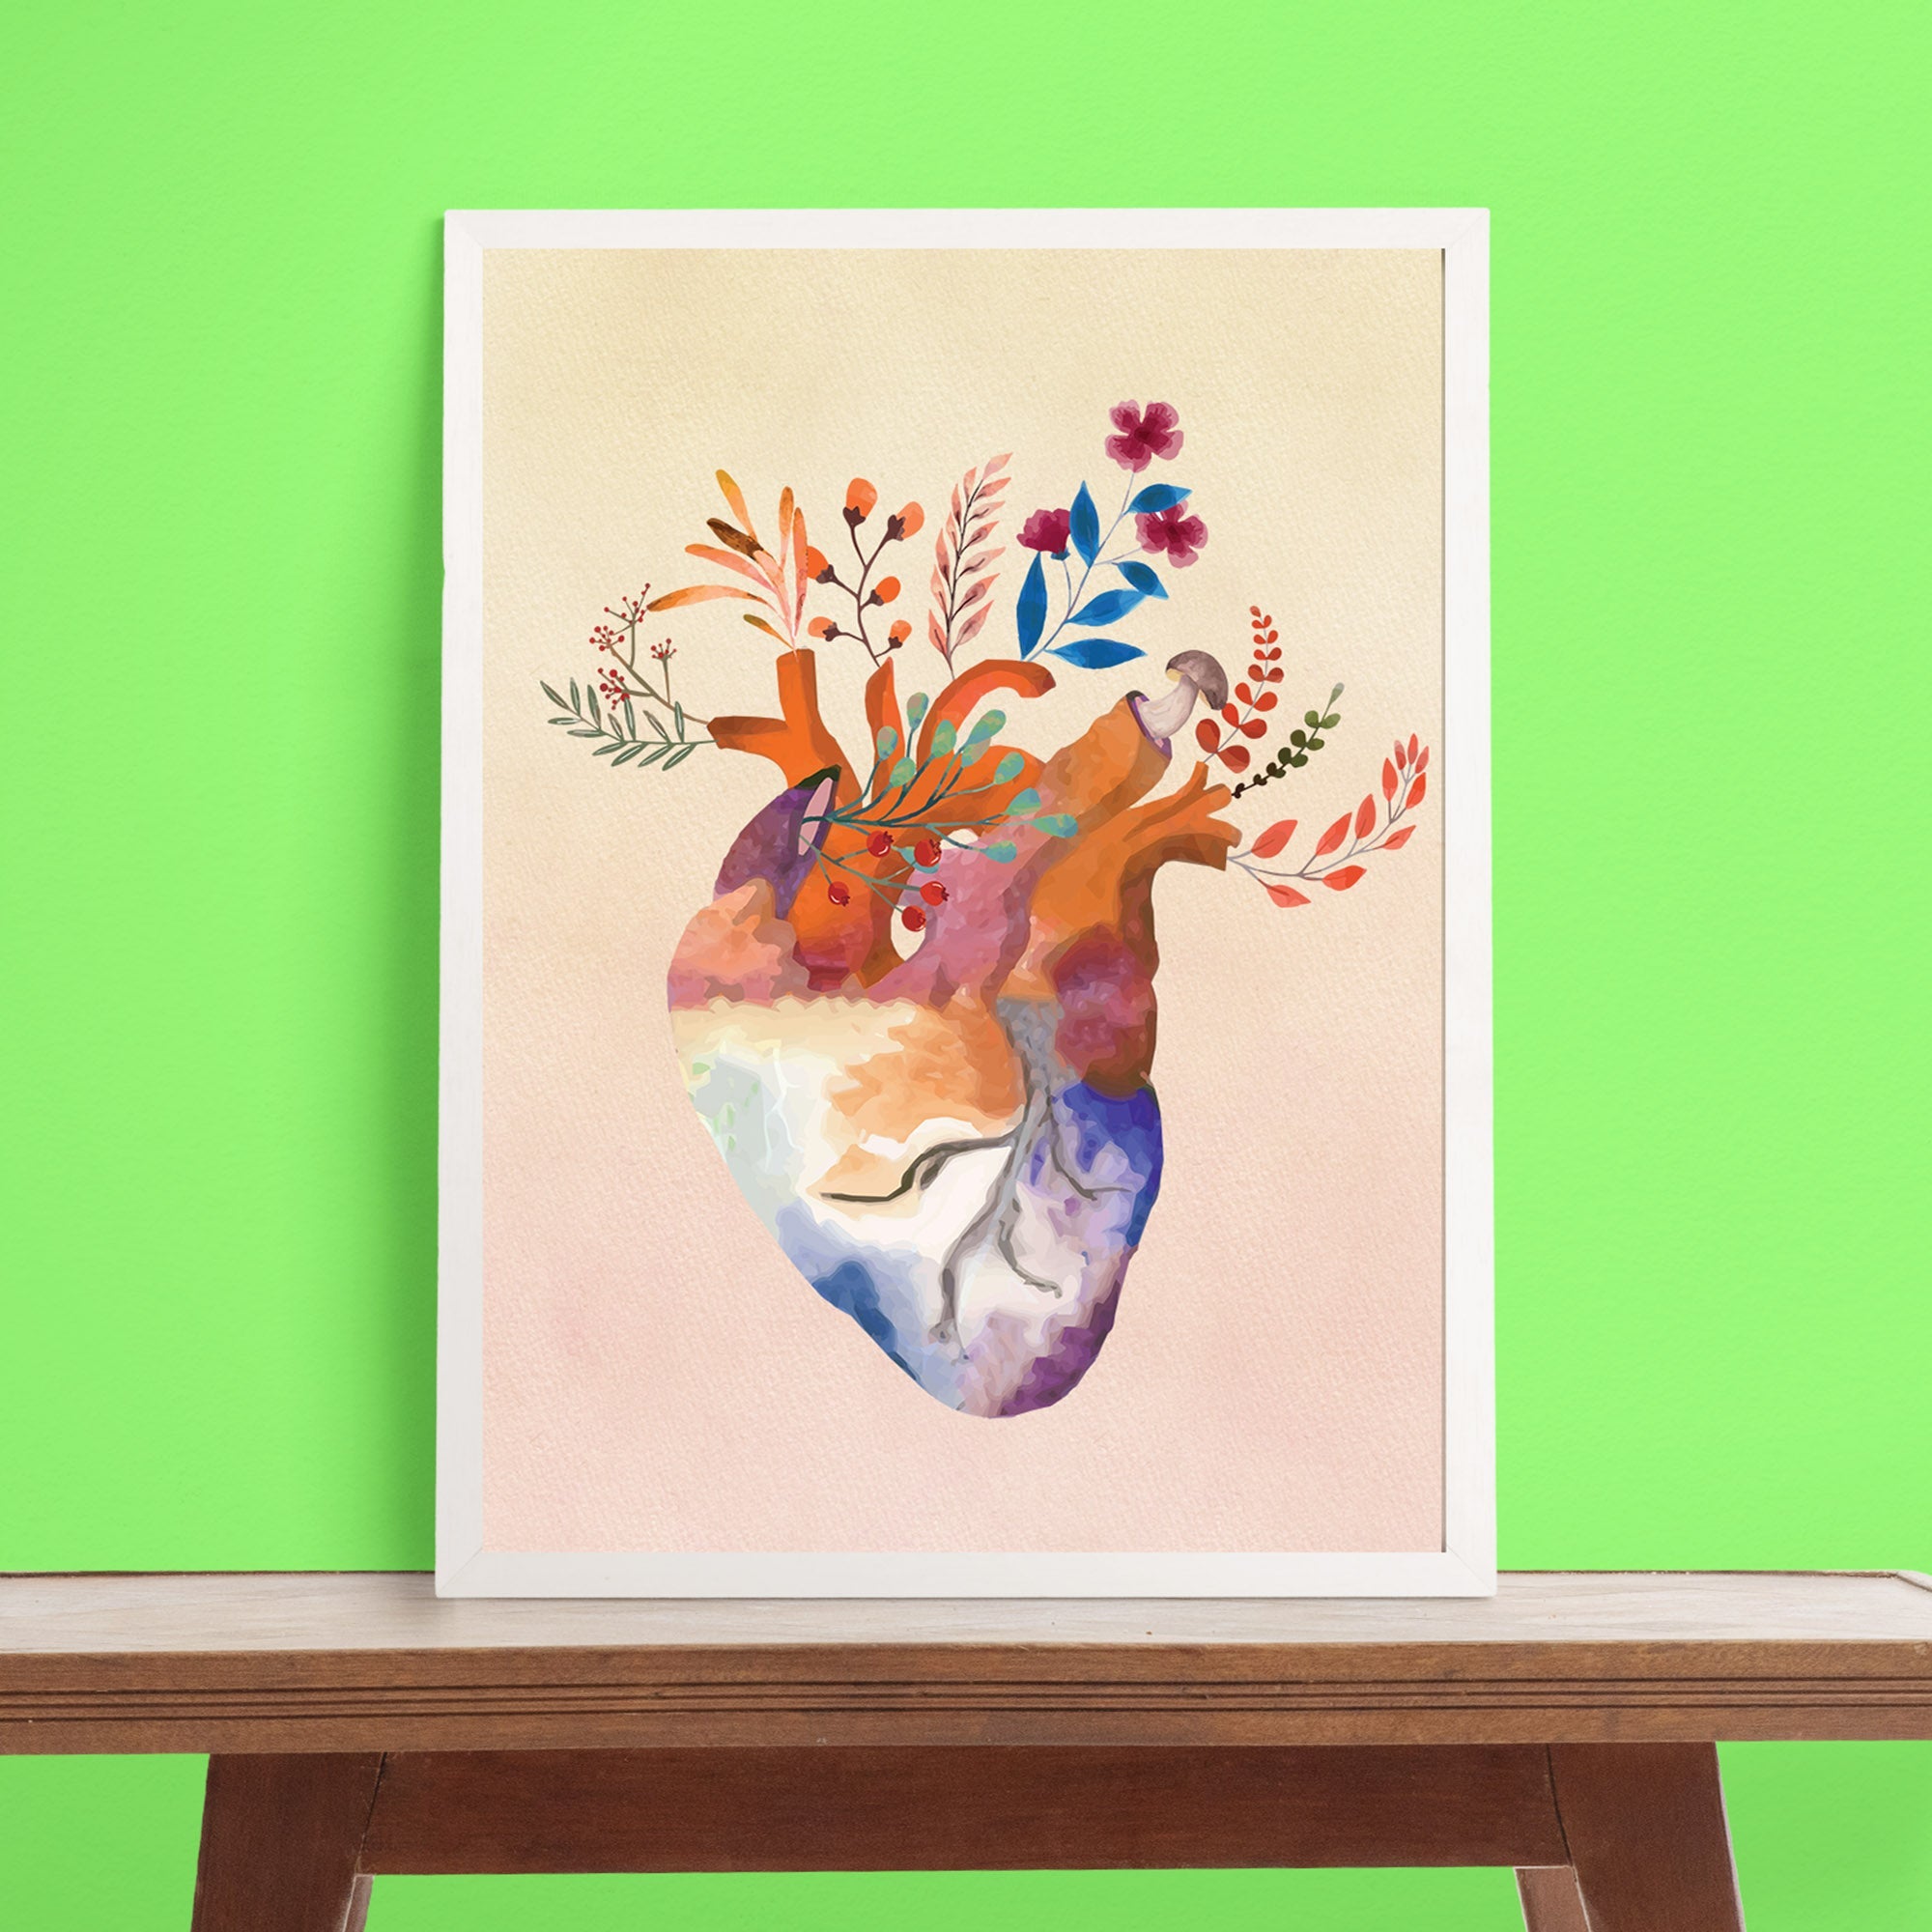 Floral Heart Art - Framed Poster For Clinics, Hospitals &amp; Study Rooms